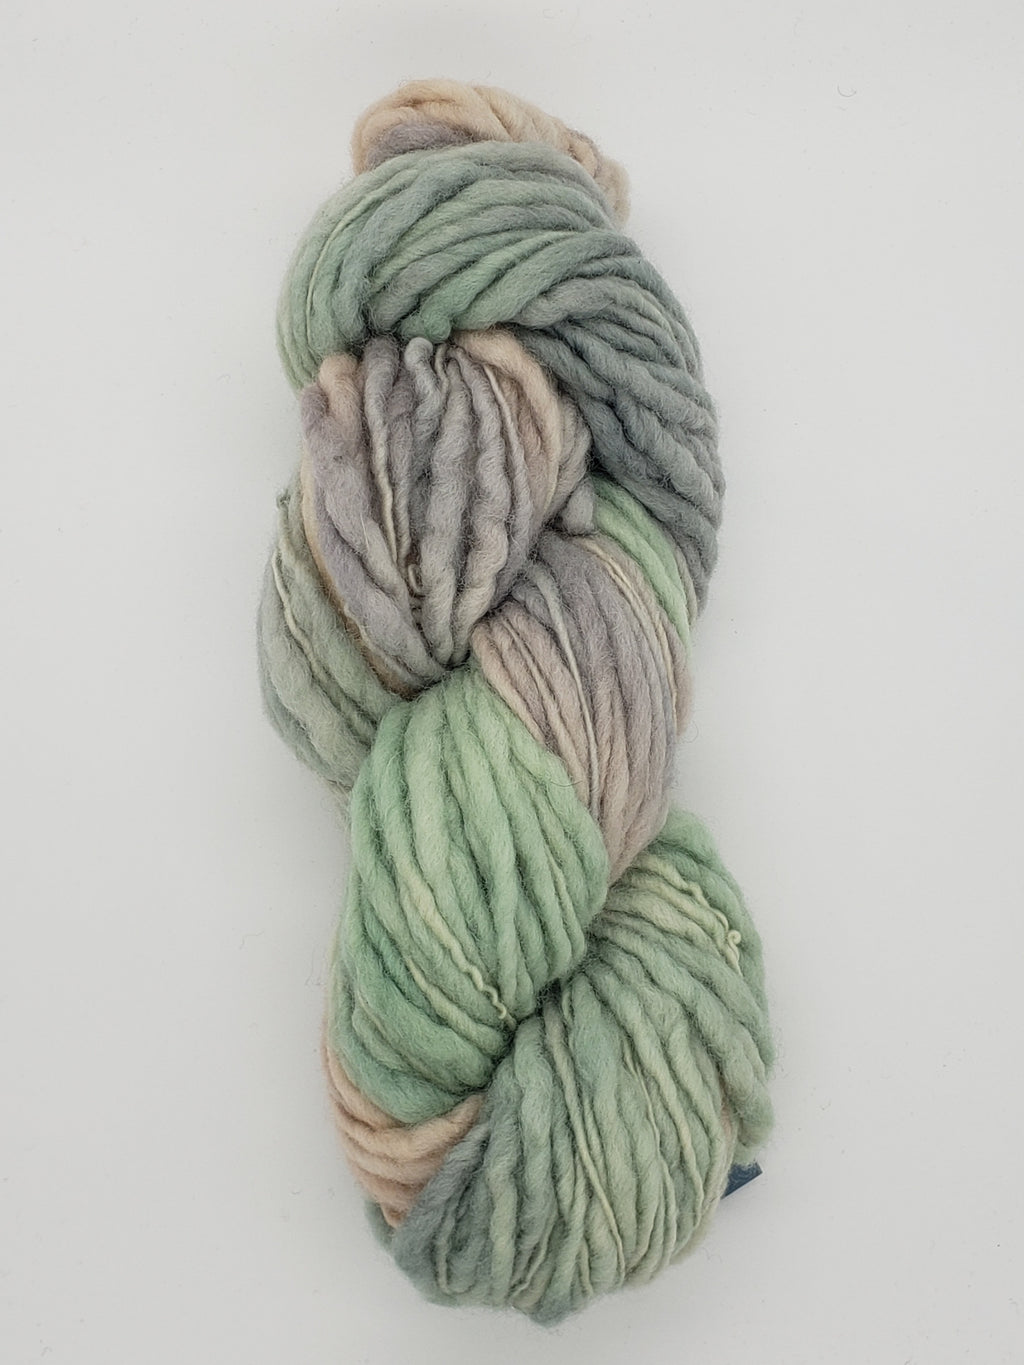 Slubby - SWEET TEA -  Merino/Blue Face Leicester - Hand Dyed Textured Yarn Thick and Thin  -  Variegated Shades